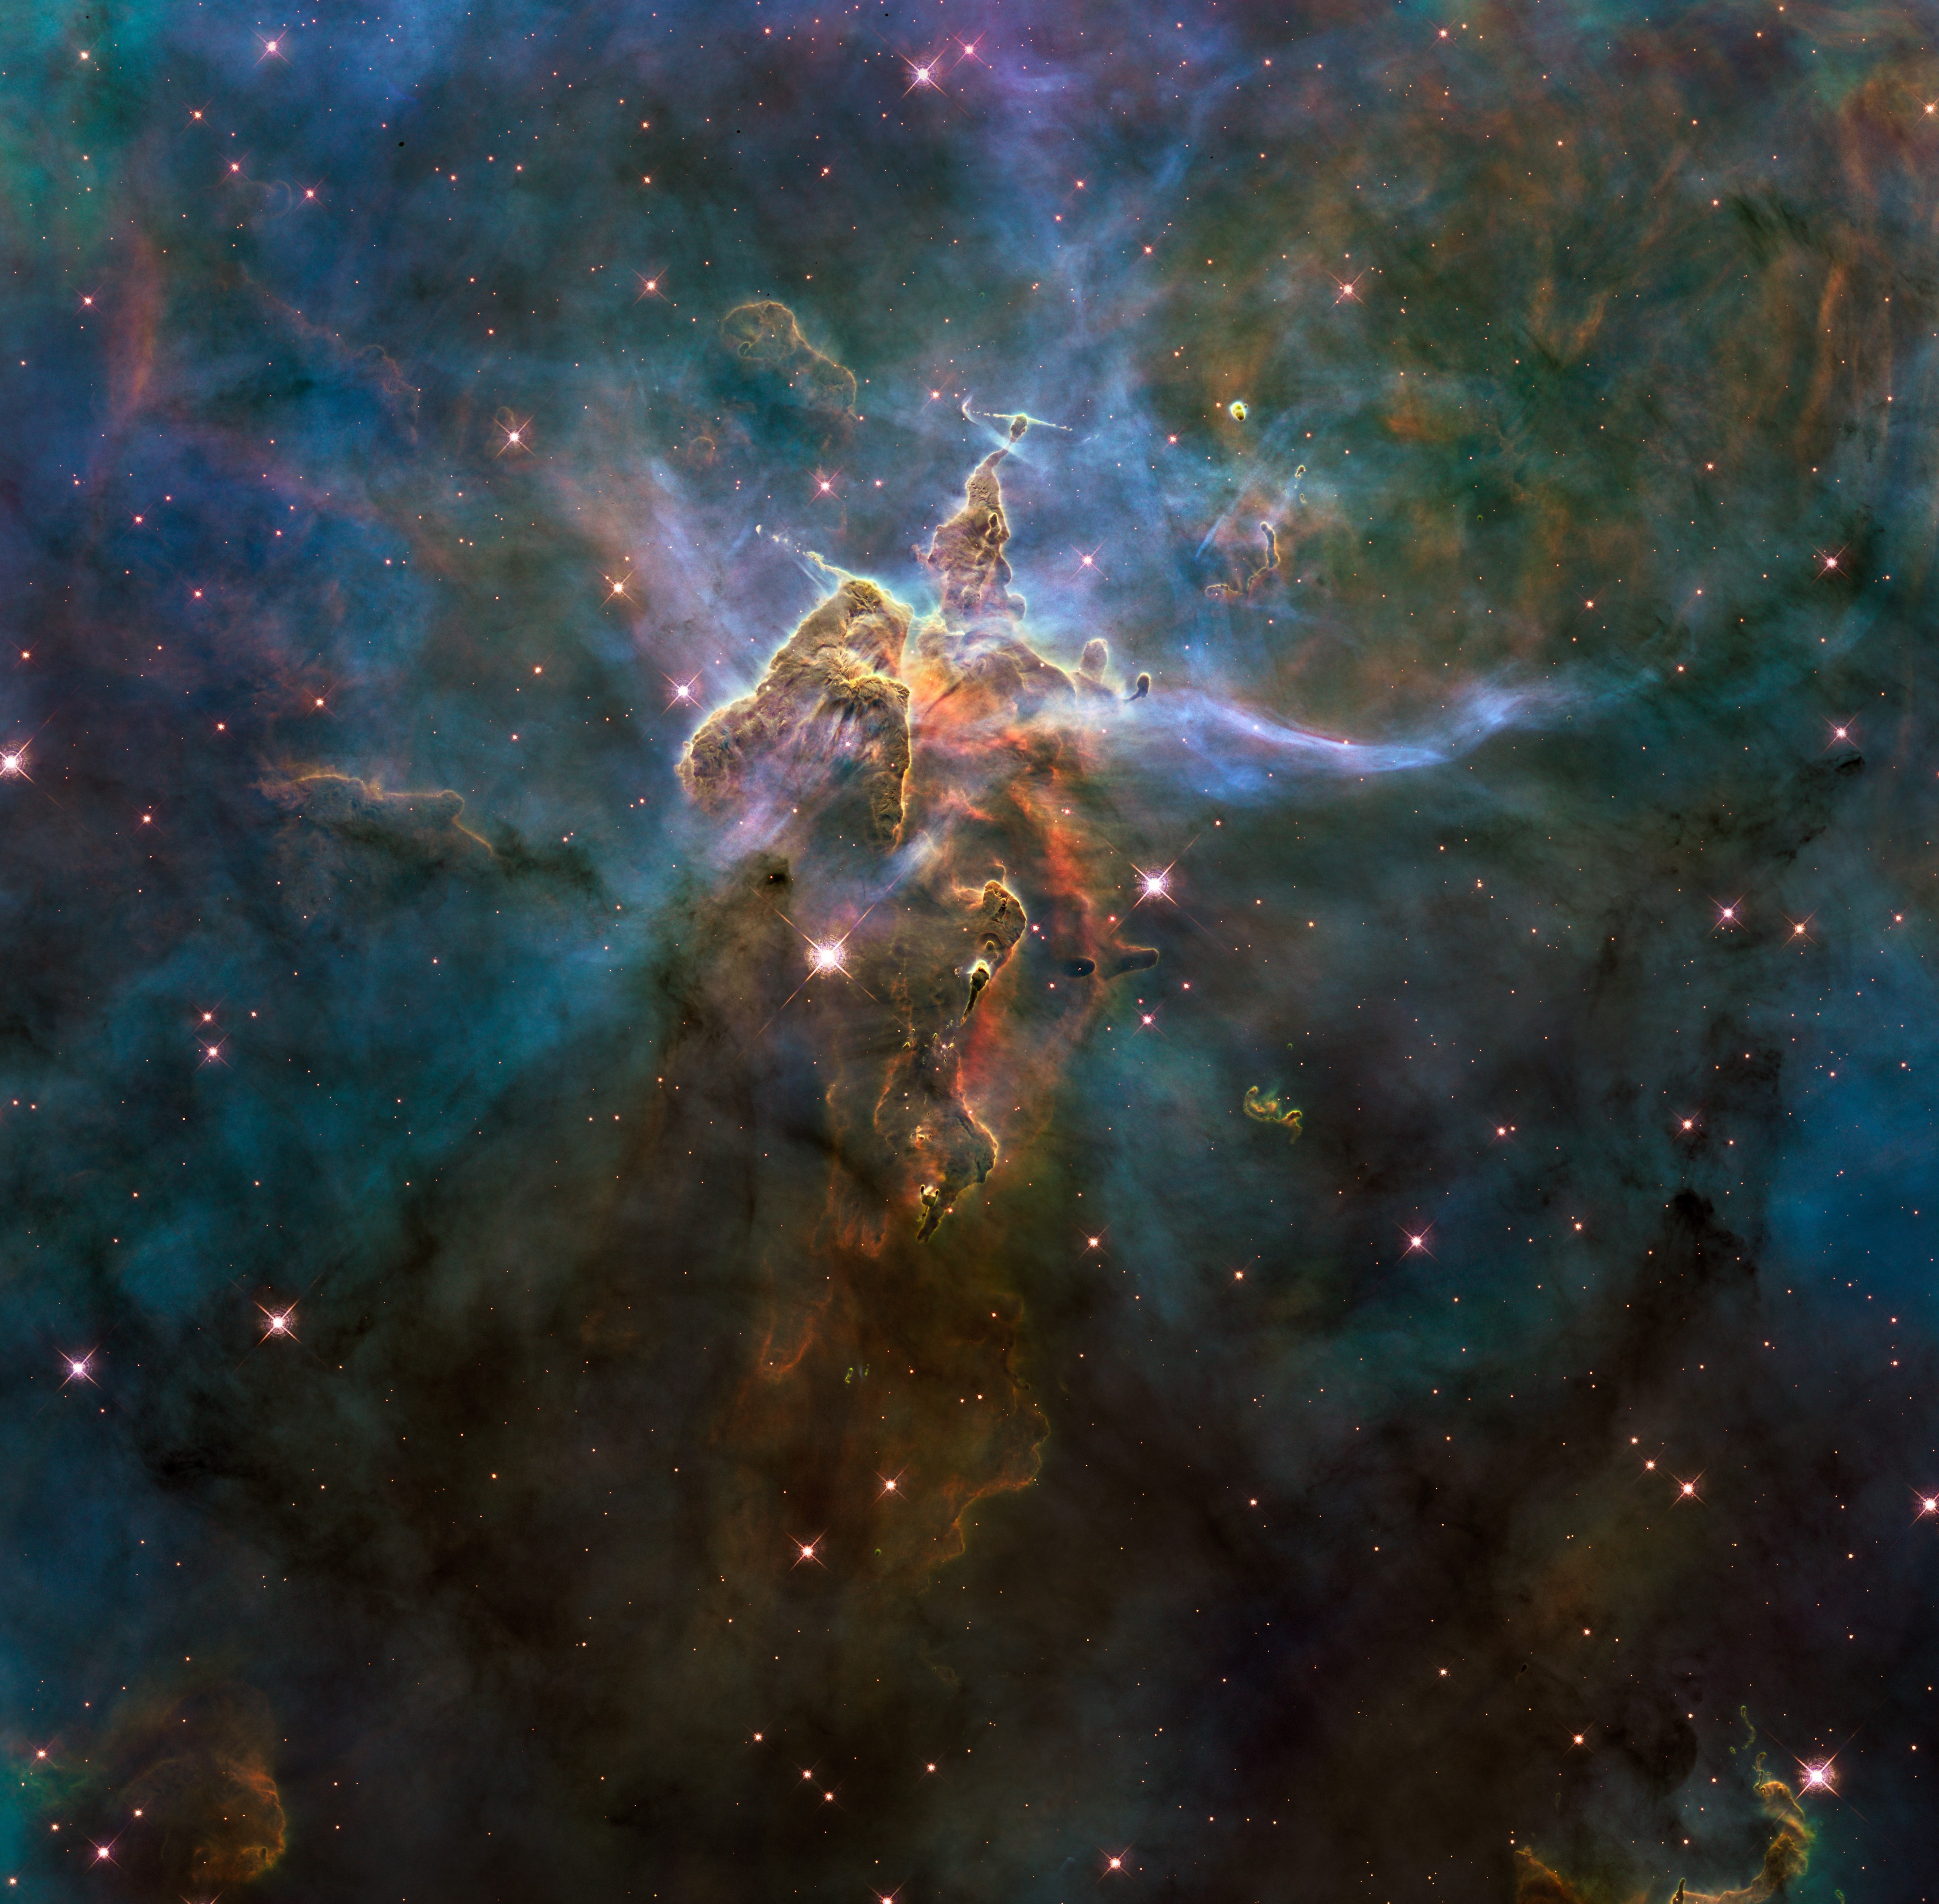 Wide view of HH 901 and HH 902 in the Carina nebula (captured by the Hubble Space Telescope)